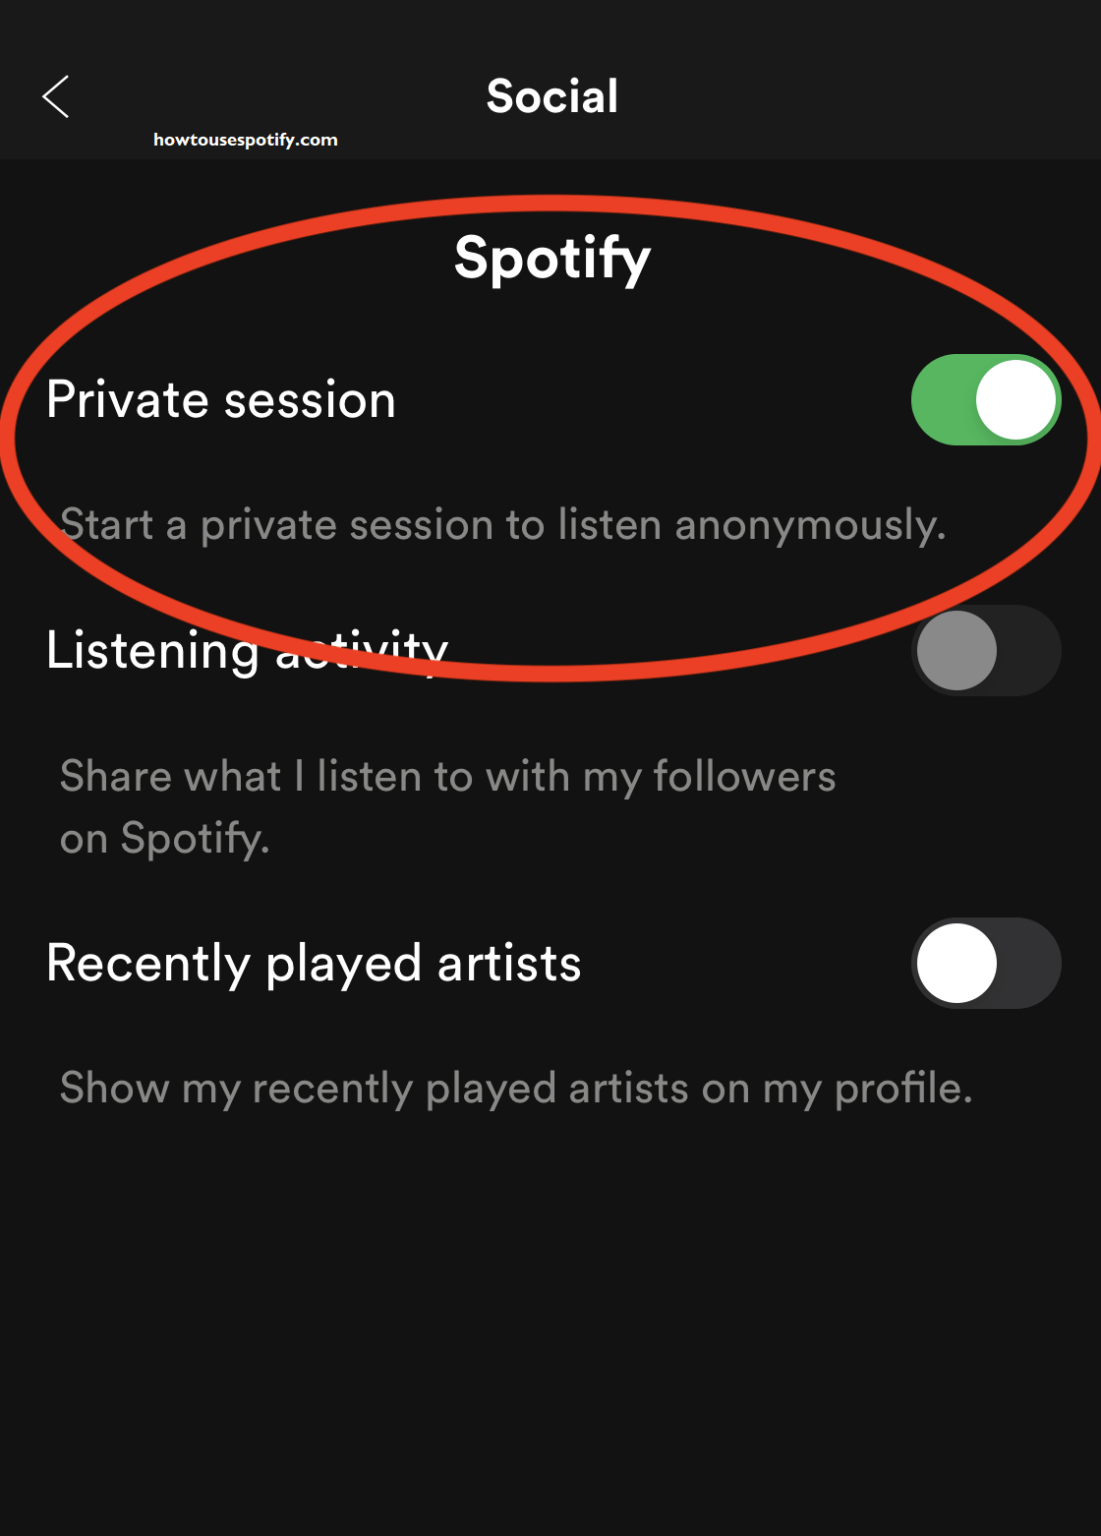 When Does Spotify Wrapped Stop Tracking 2023? Best Way